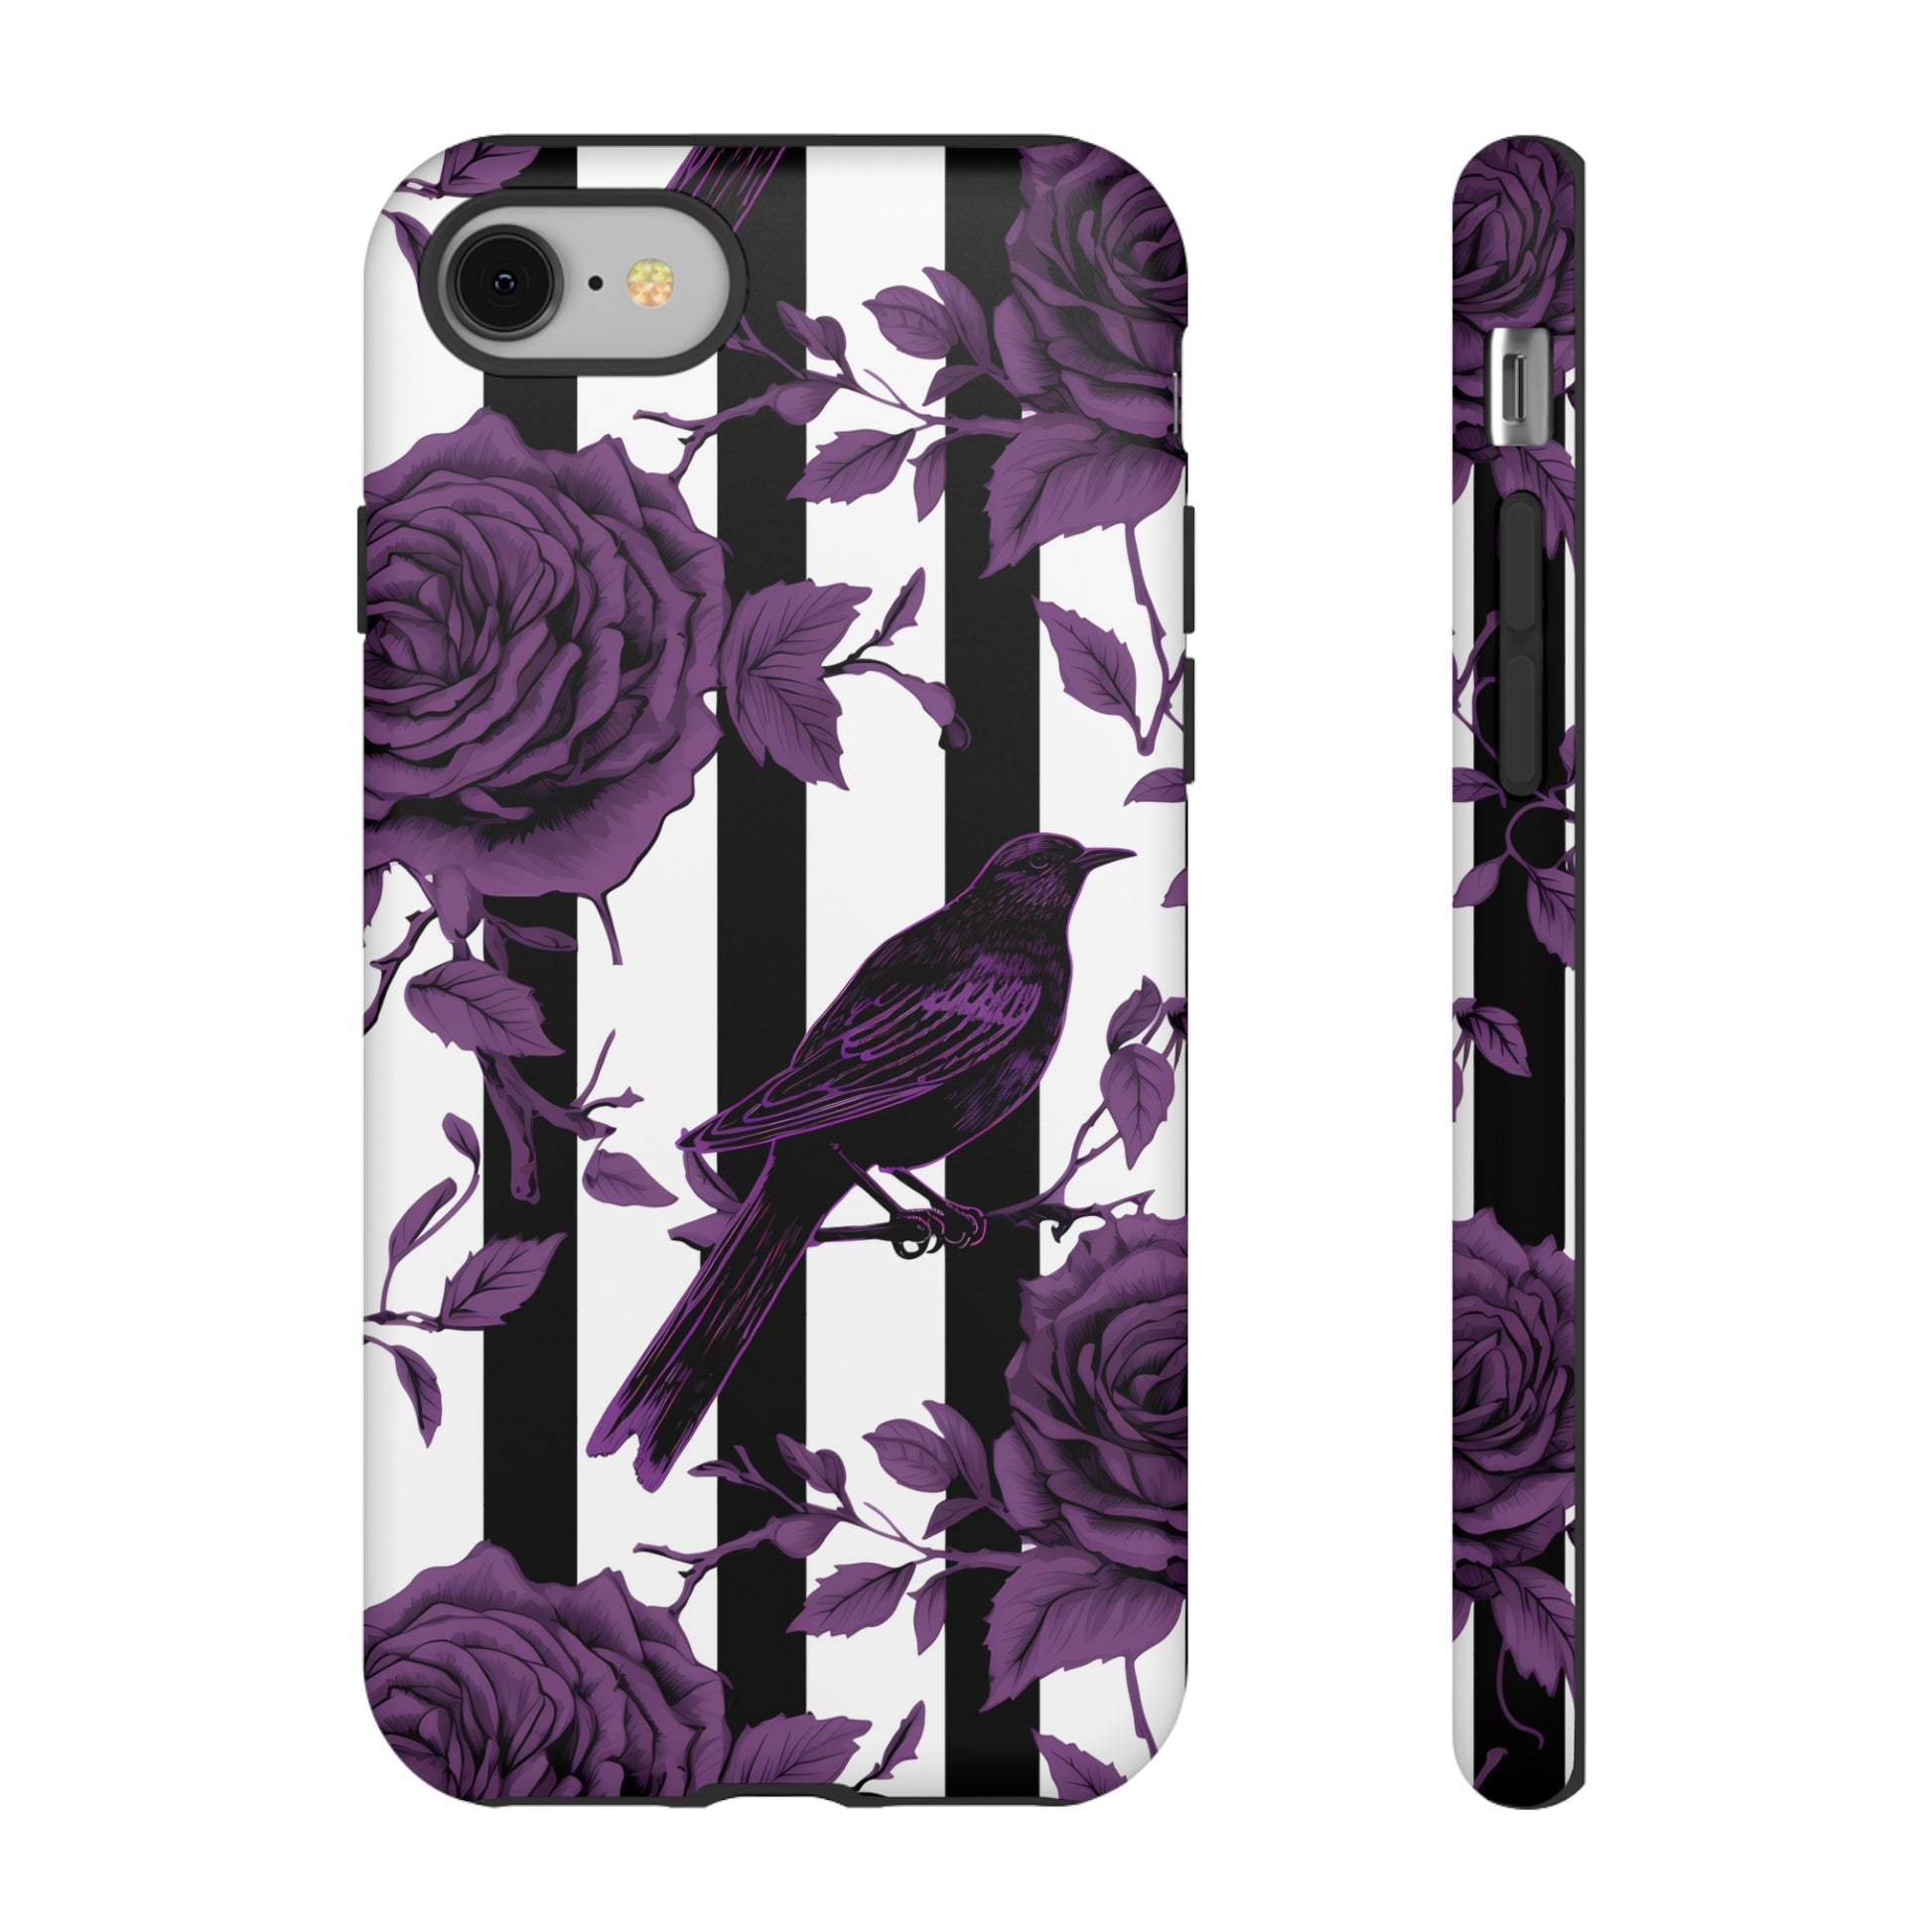 Striped Crows and Roses Tough Cases for iPhone Samsung Google PhonesPhone CaseVTZdesignsiPhone 8MatteAccessoriescrowsGlossy